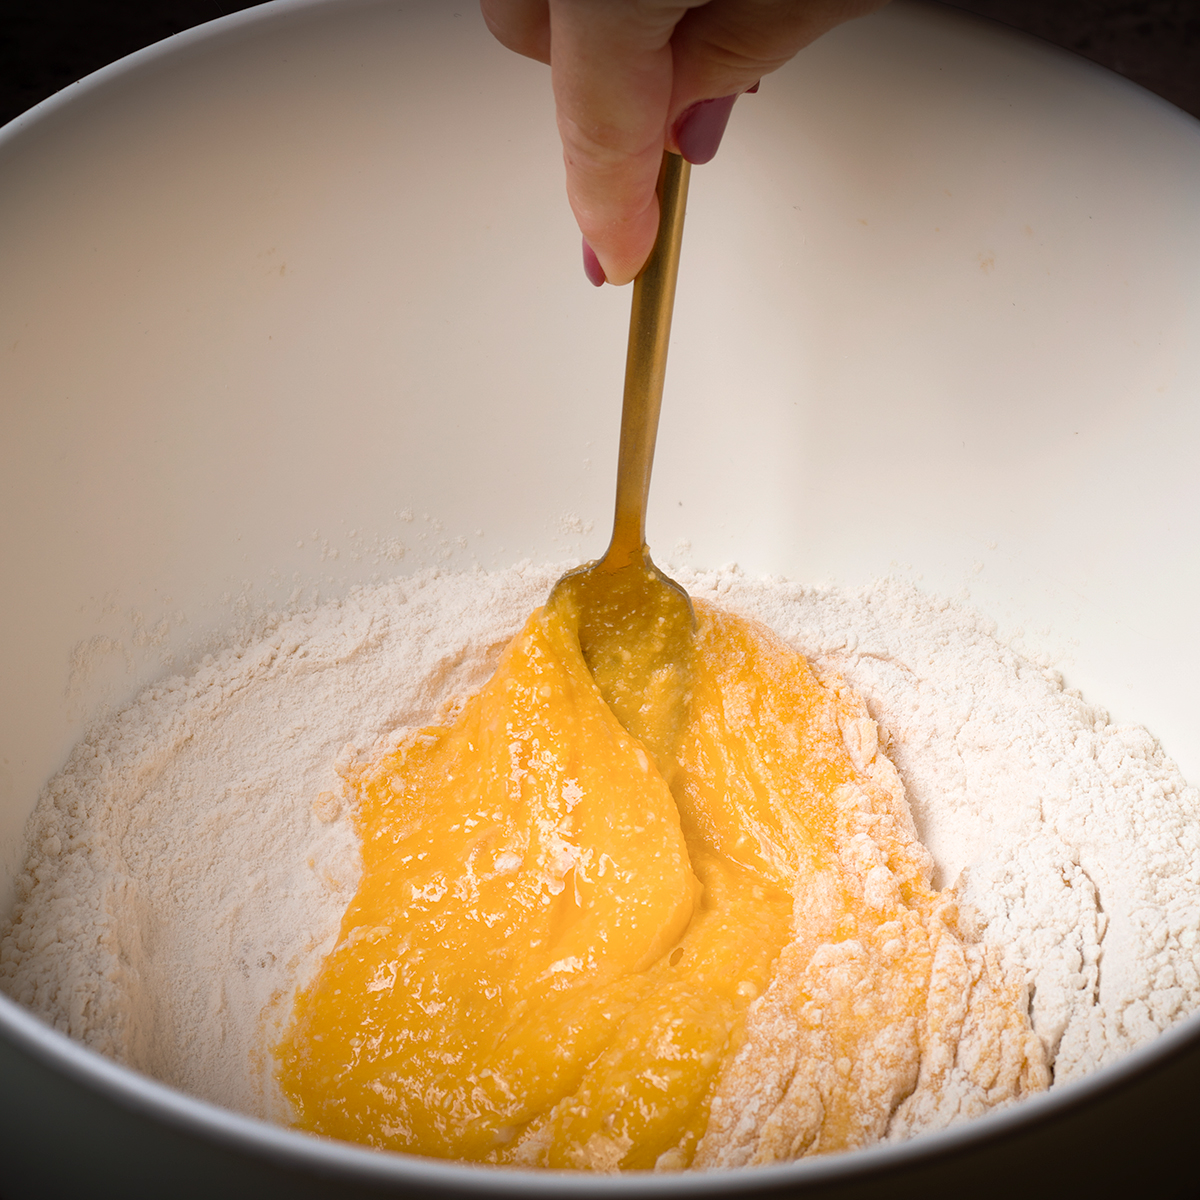 Using a fork to slowly incorporate more flour into beaten eggs to make pasta dough.